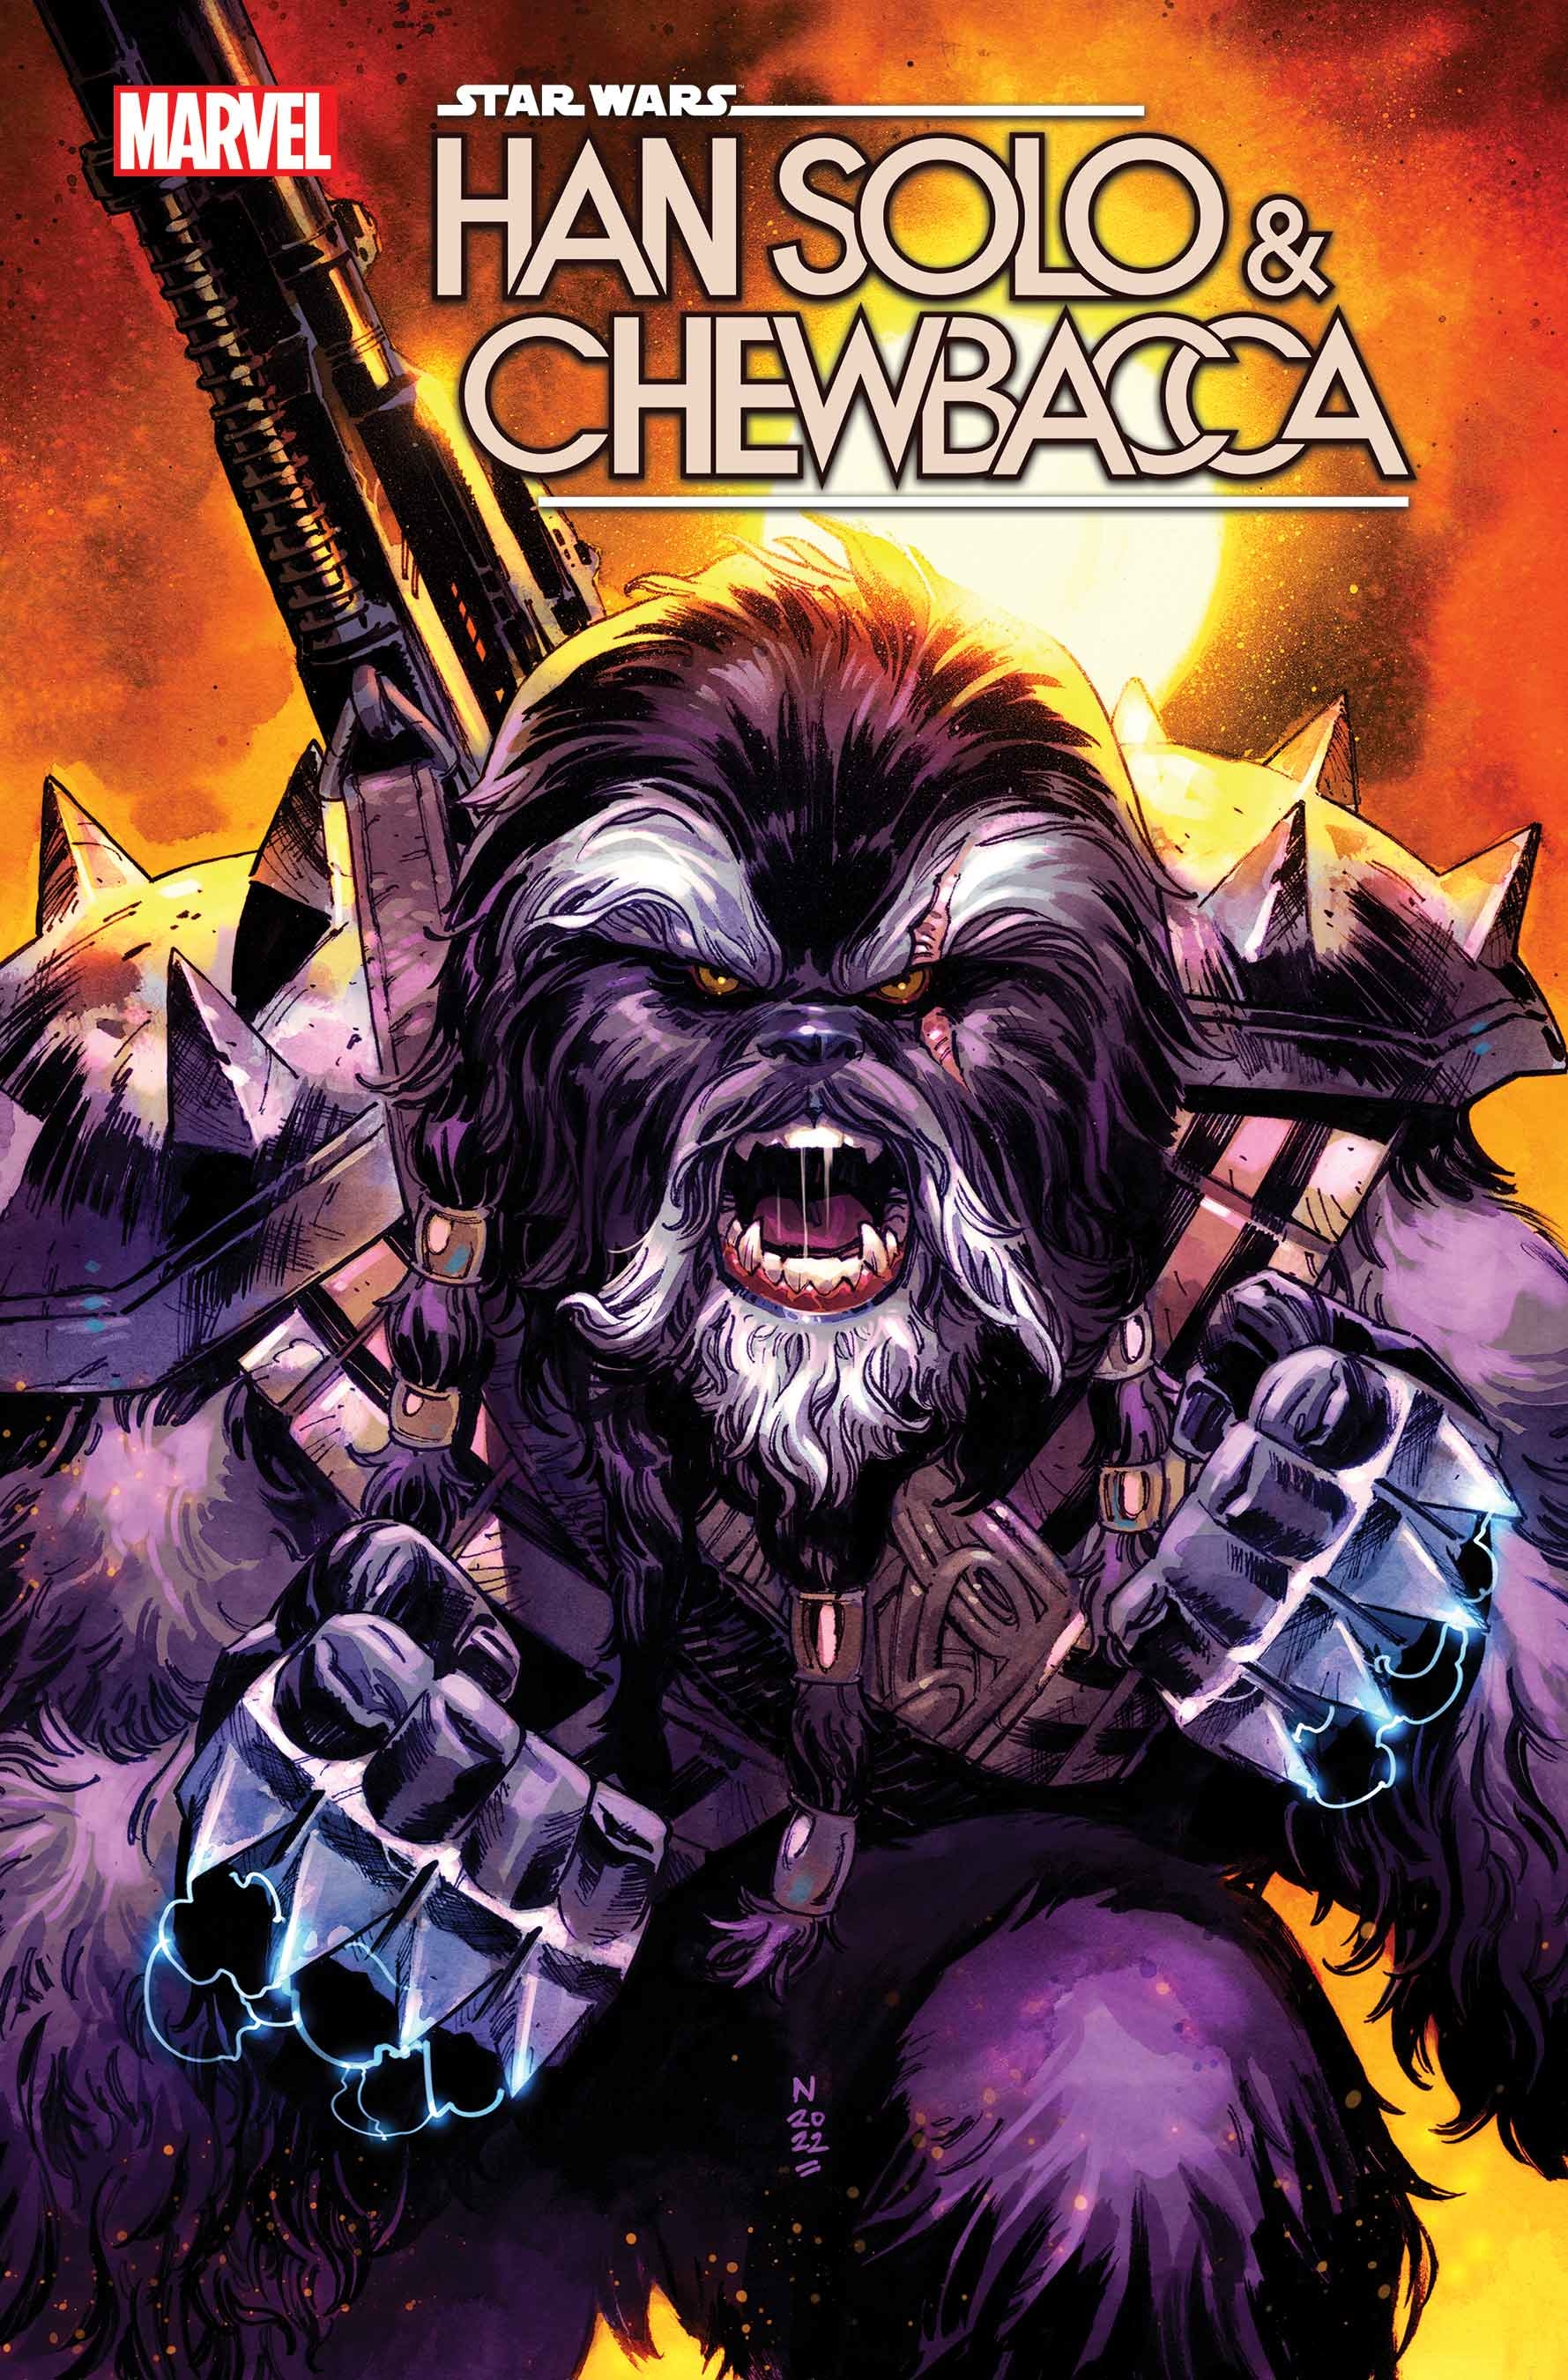 Star Wars Han Solo & Chewbacca #4 1 for 25 Incentive Klein Variant